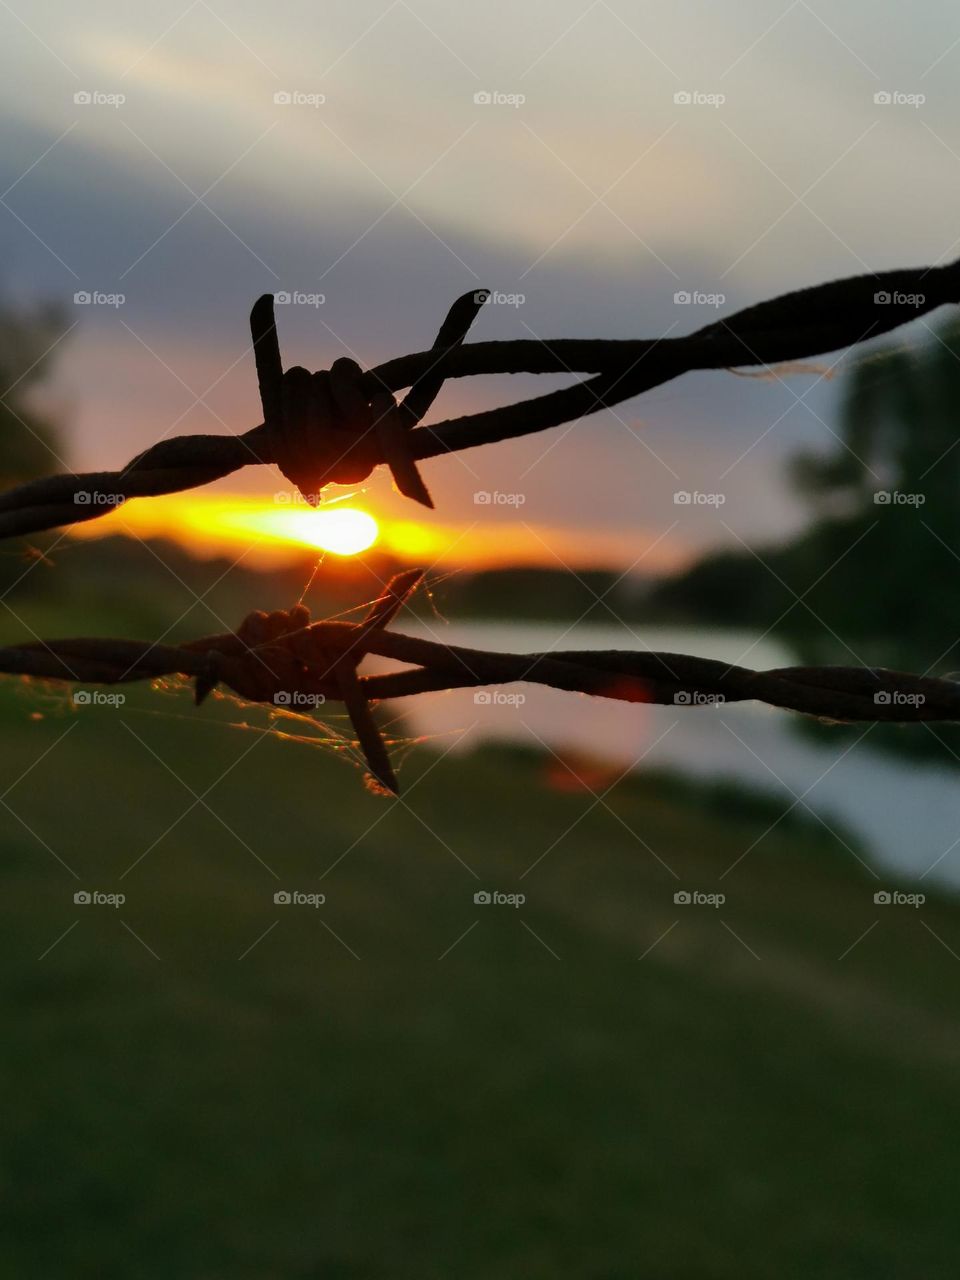 Sunset and barbed wire.